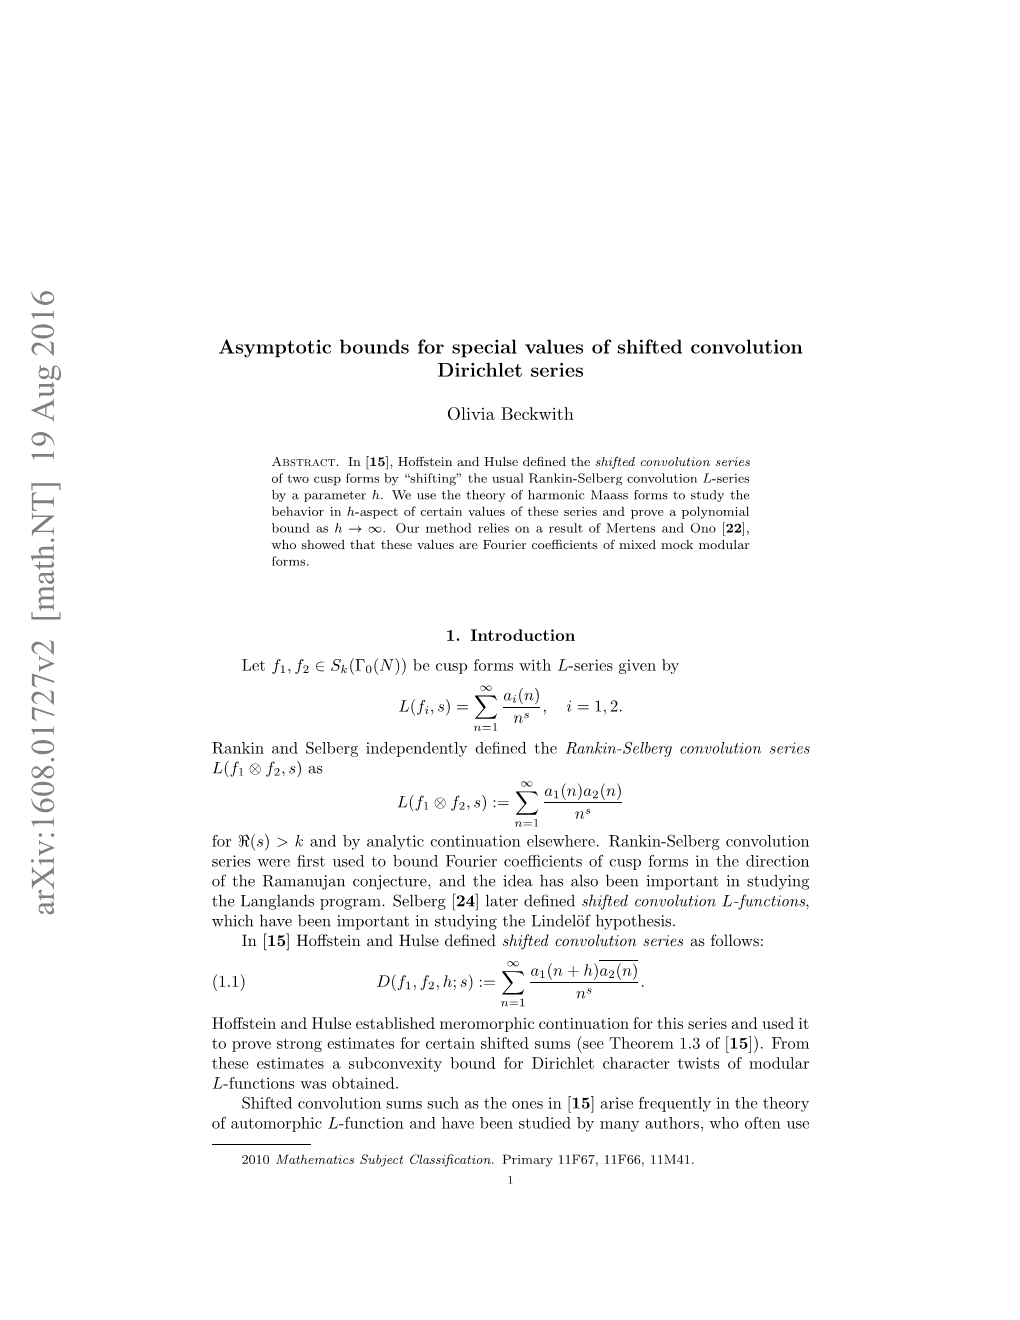 Asymptotic Bounds for Special Values of Shifted Convolution Dirichlet Series3